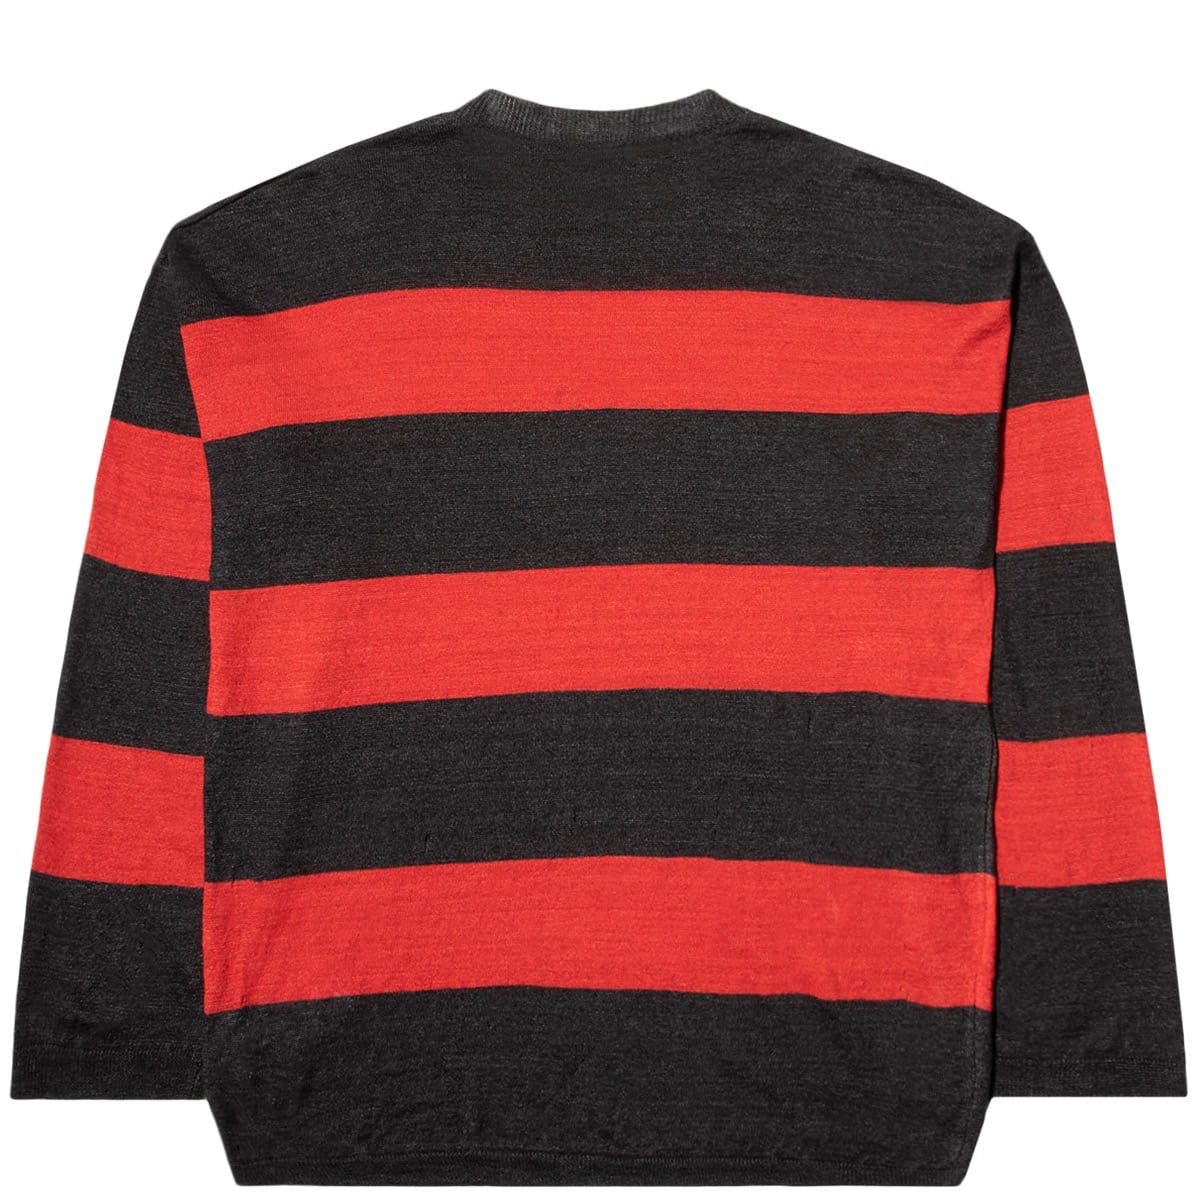 Our Legacy Knitwear RED/BROWN STRIPE MOTH / L POPOVER DROP KNIT